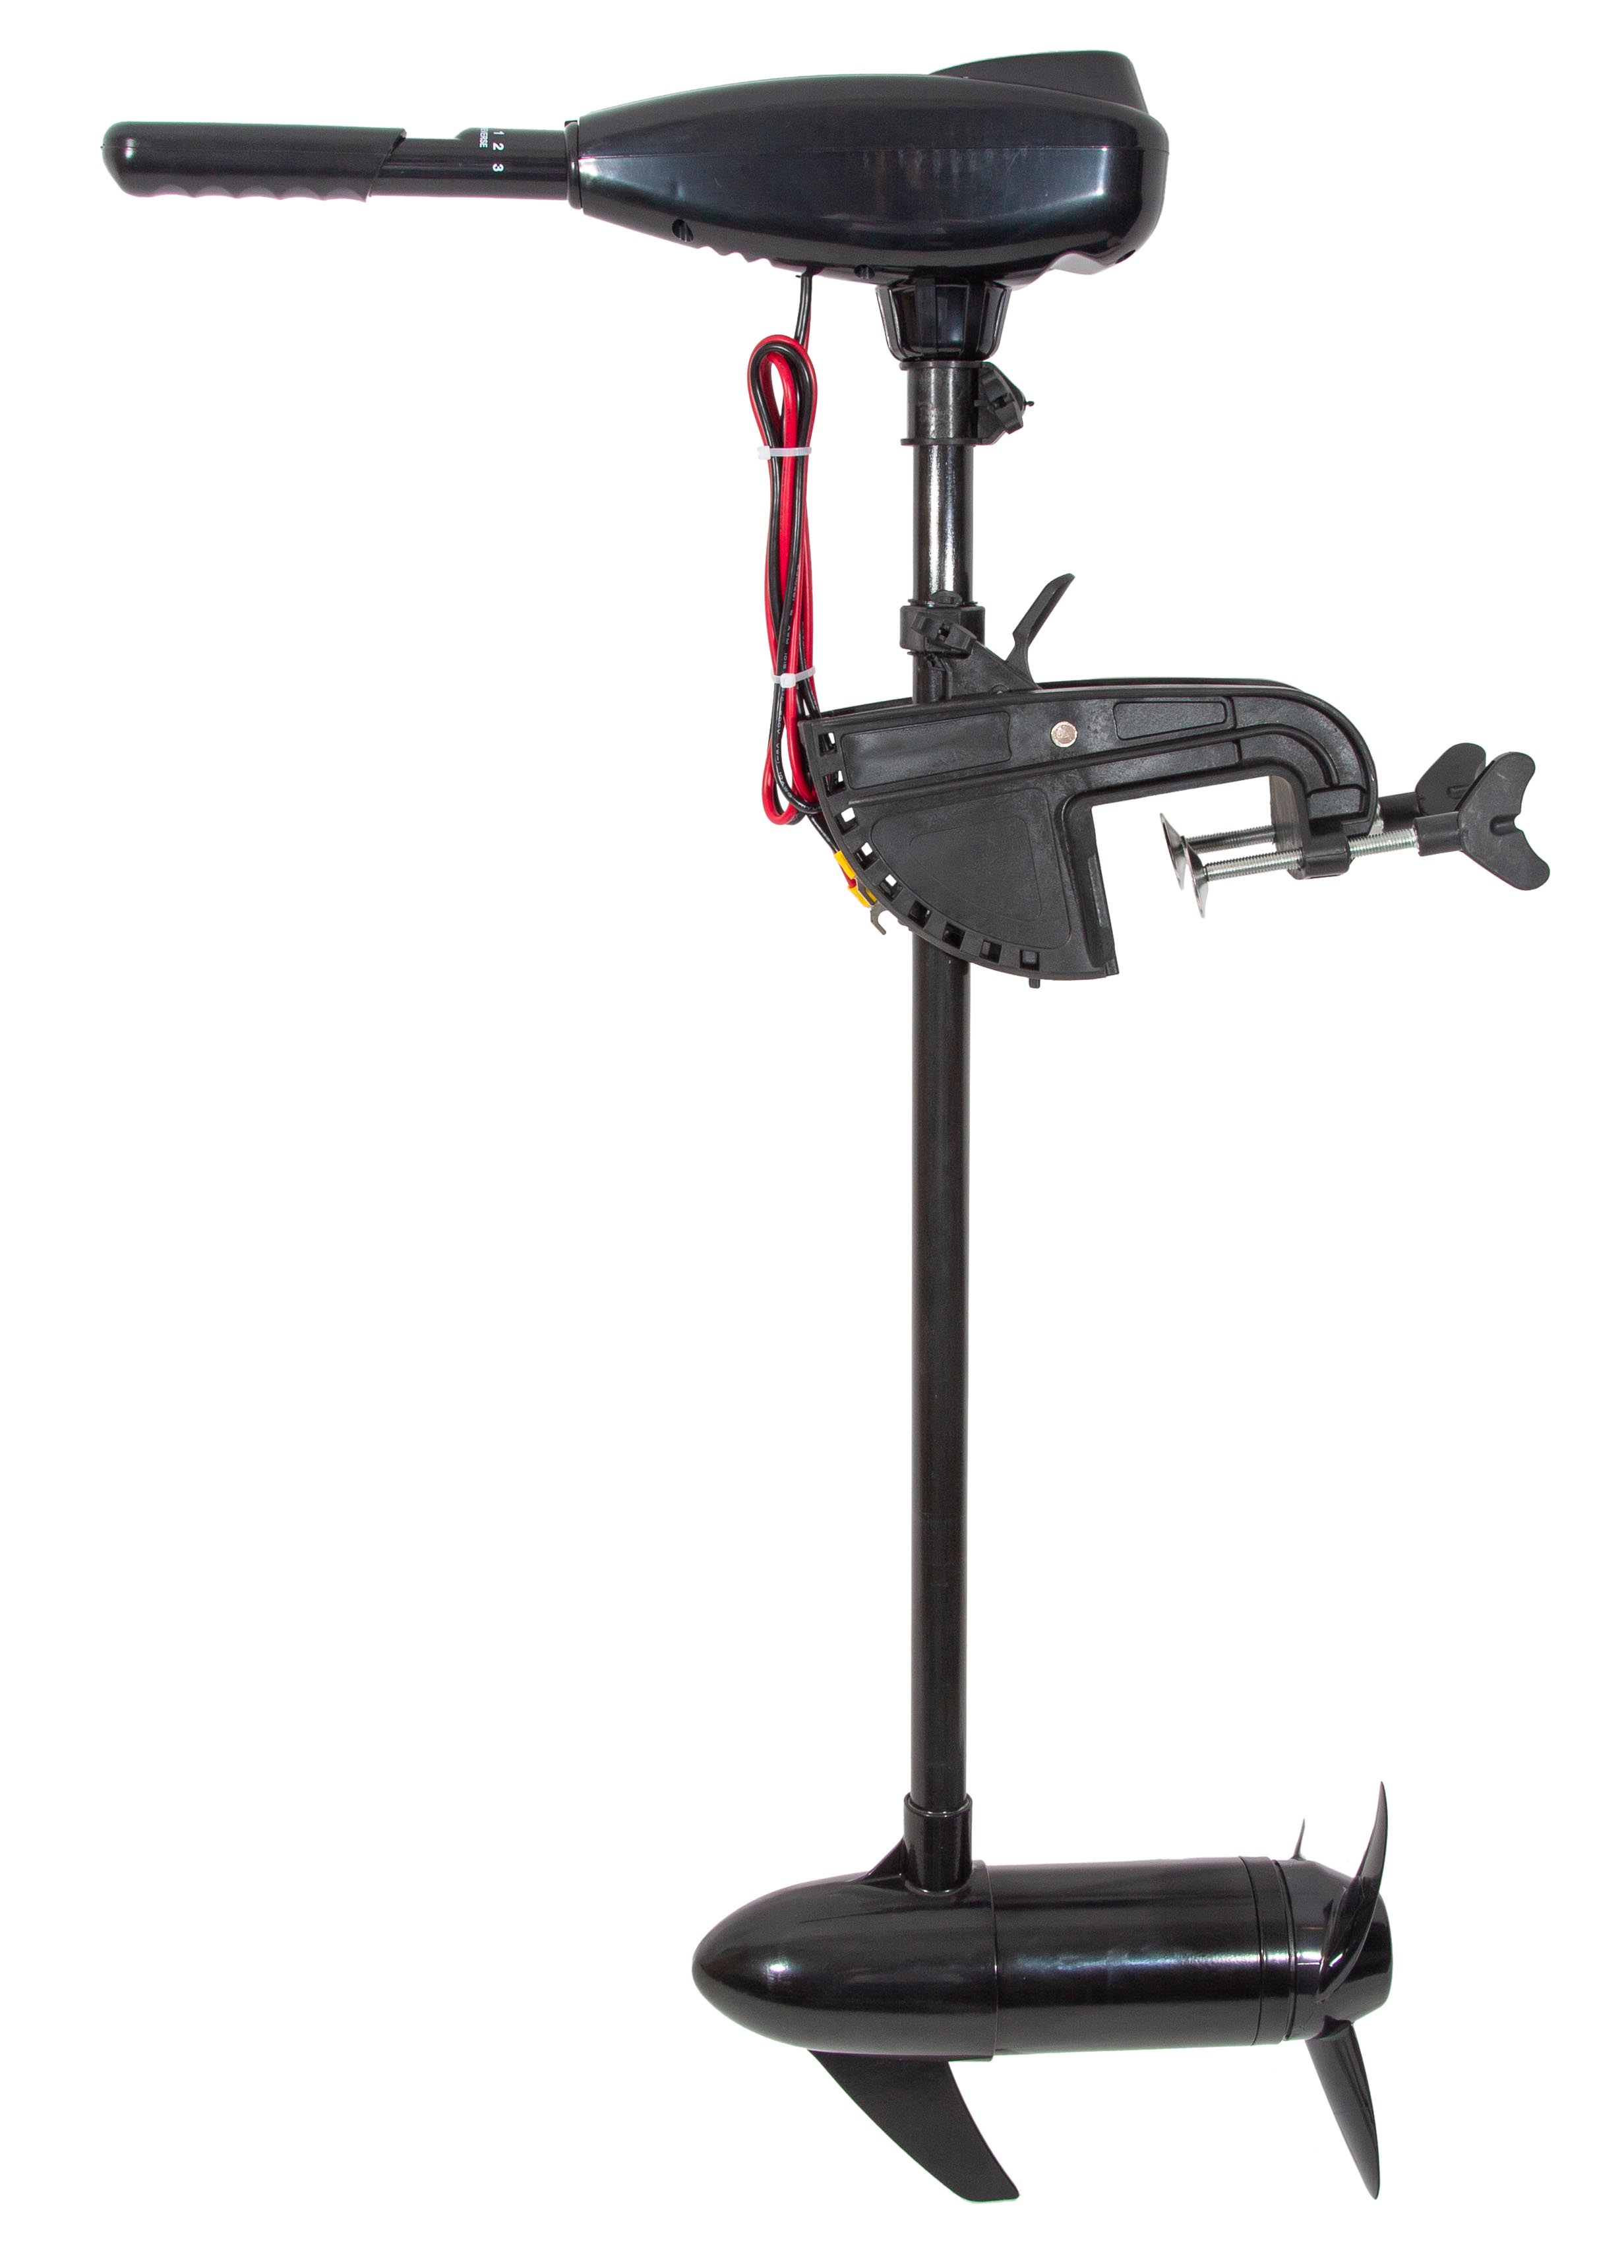 Ultimate Electric Outboard - 36lbs